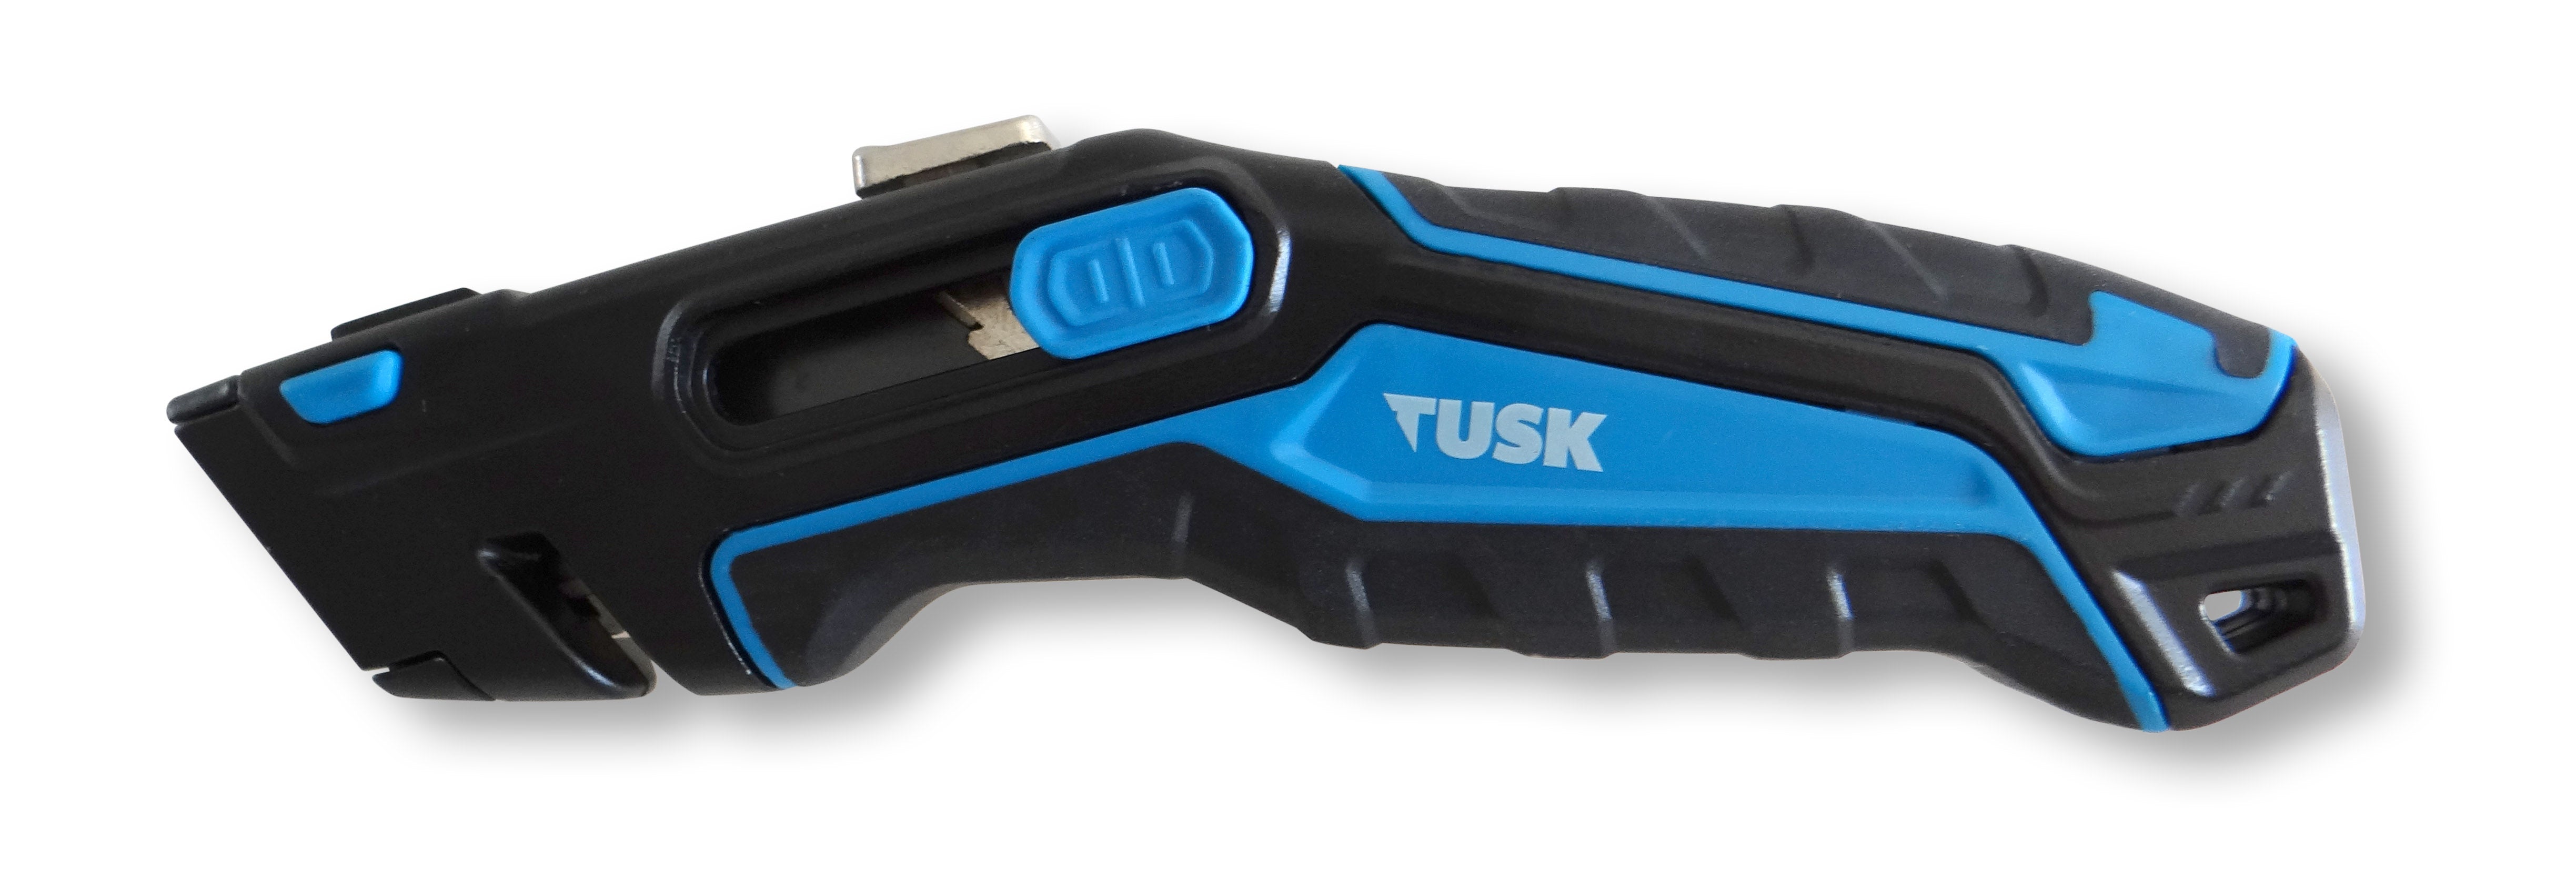 Tusk Retractable Utility Knife With 3 Pcs Blades